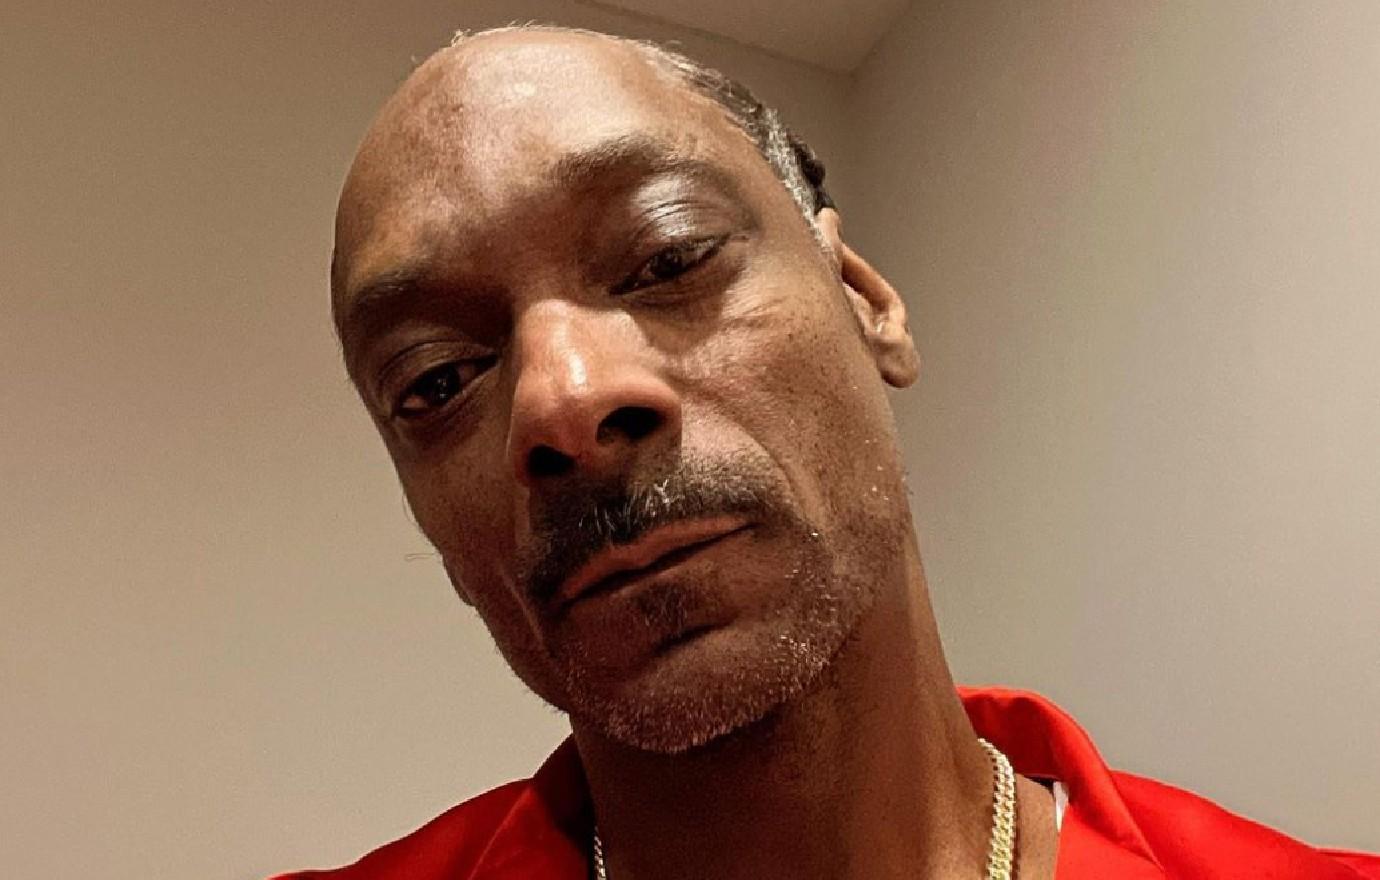 Snoop Dogg Shocks Fans By Announcing He's 'Giving Up Smoking